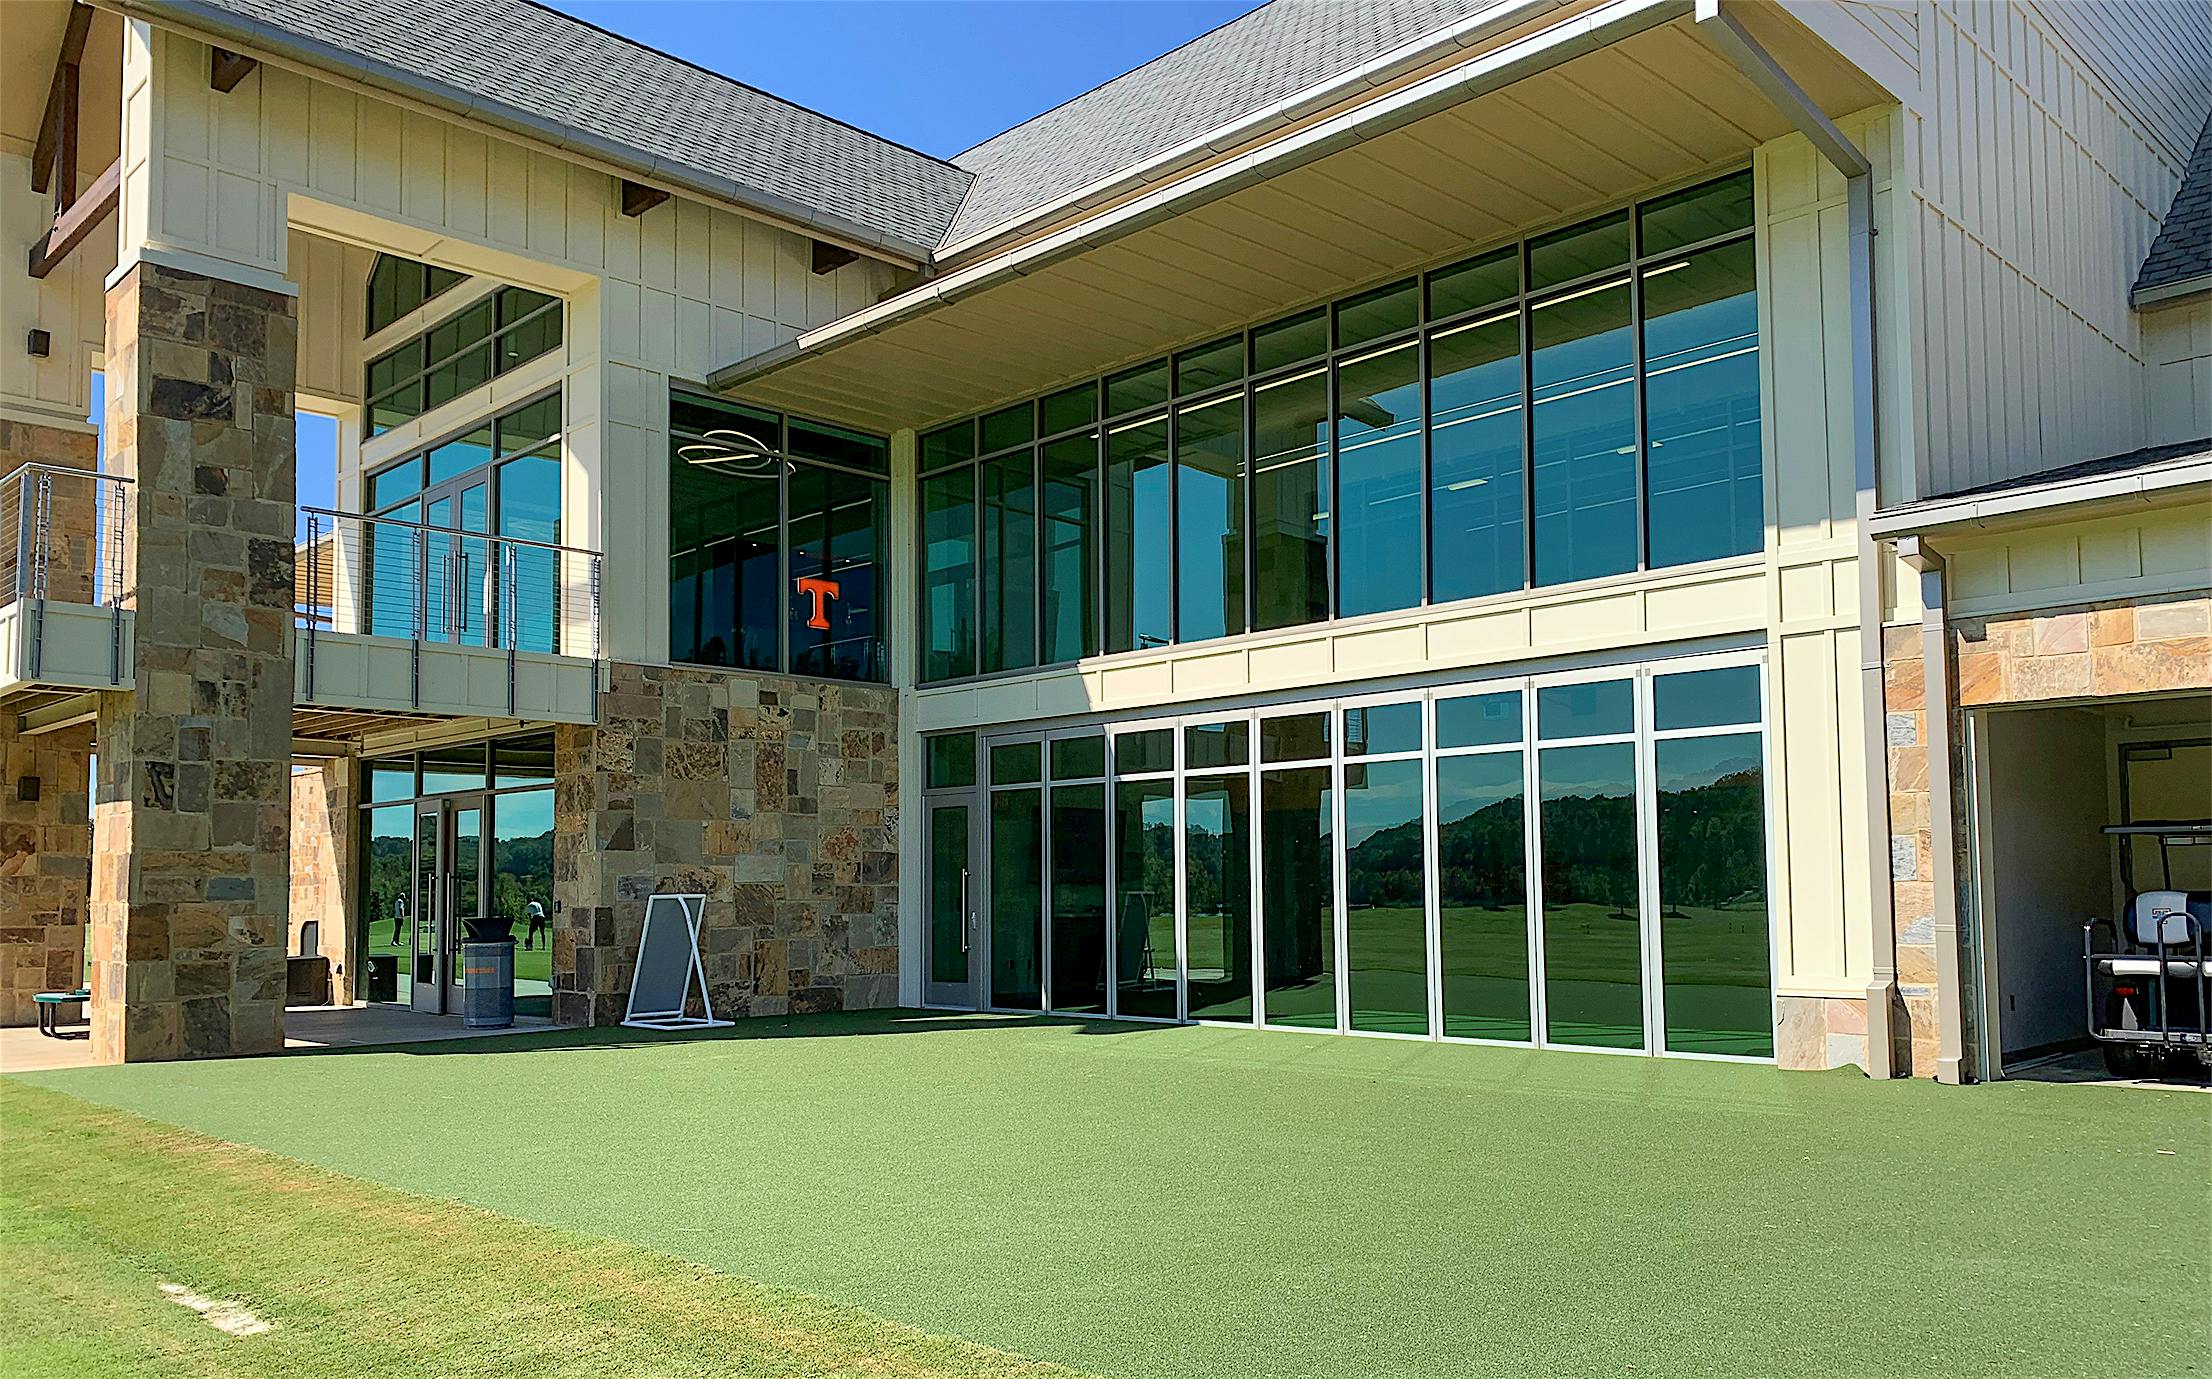 indoor outdoor putting green with NanaWall sliding glass walls